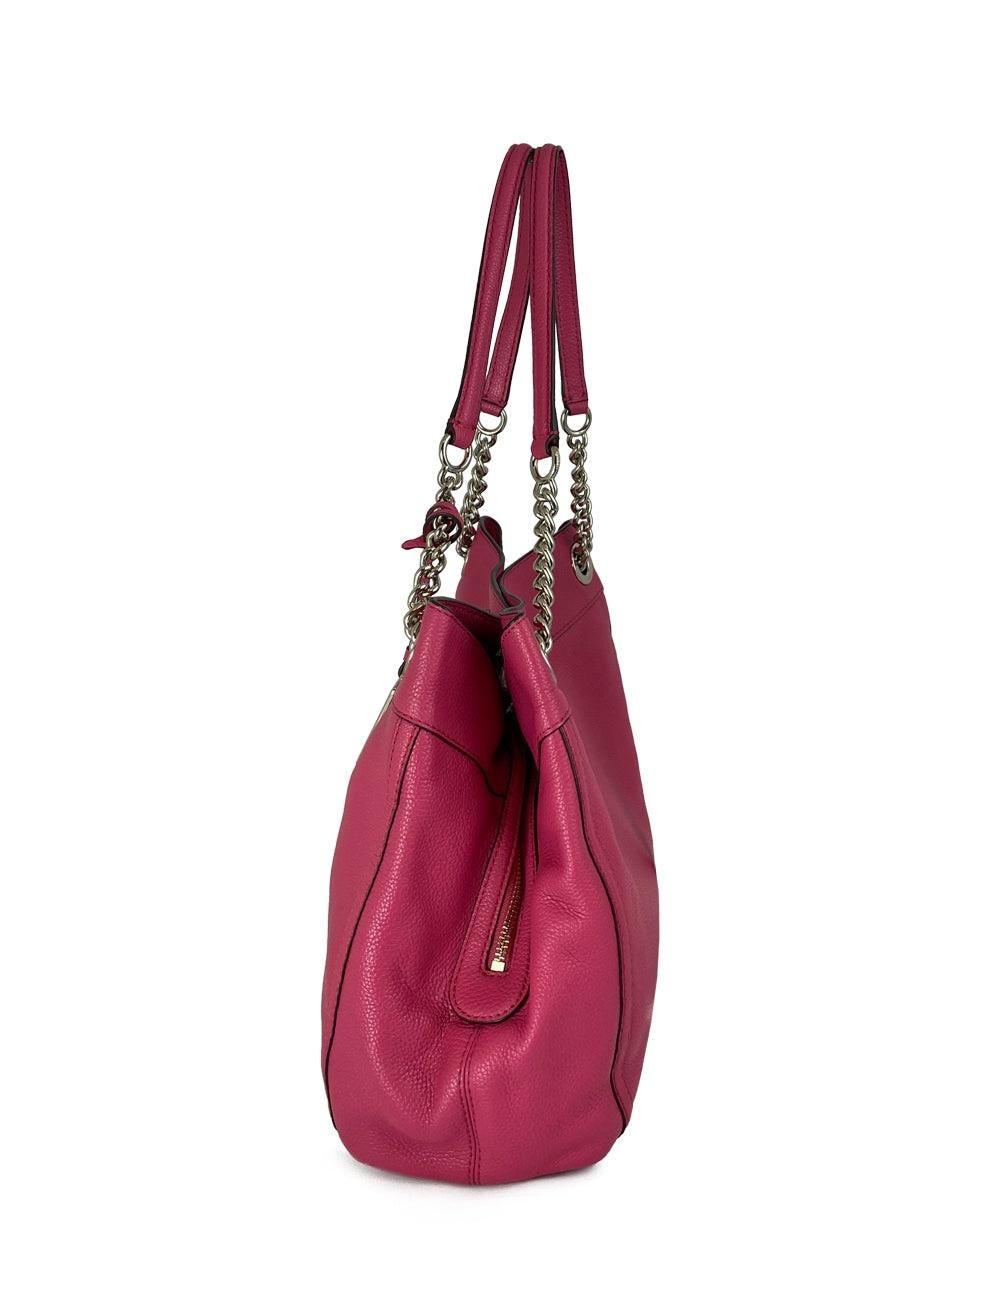 Fuchsia Coach handbag with two zipper pockets and two slide pockets on the inside. In excellent condition.

Additional information:
Material: Leather
Hardware: Silver
Measurements: 36 W x 17 D x 27 H cm
Handle Drop: 24 cm
Overall condition: Very